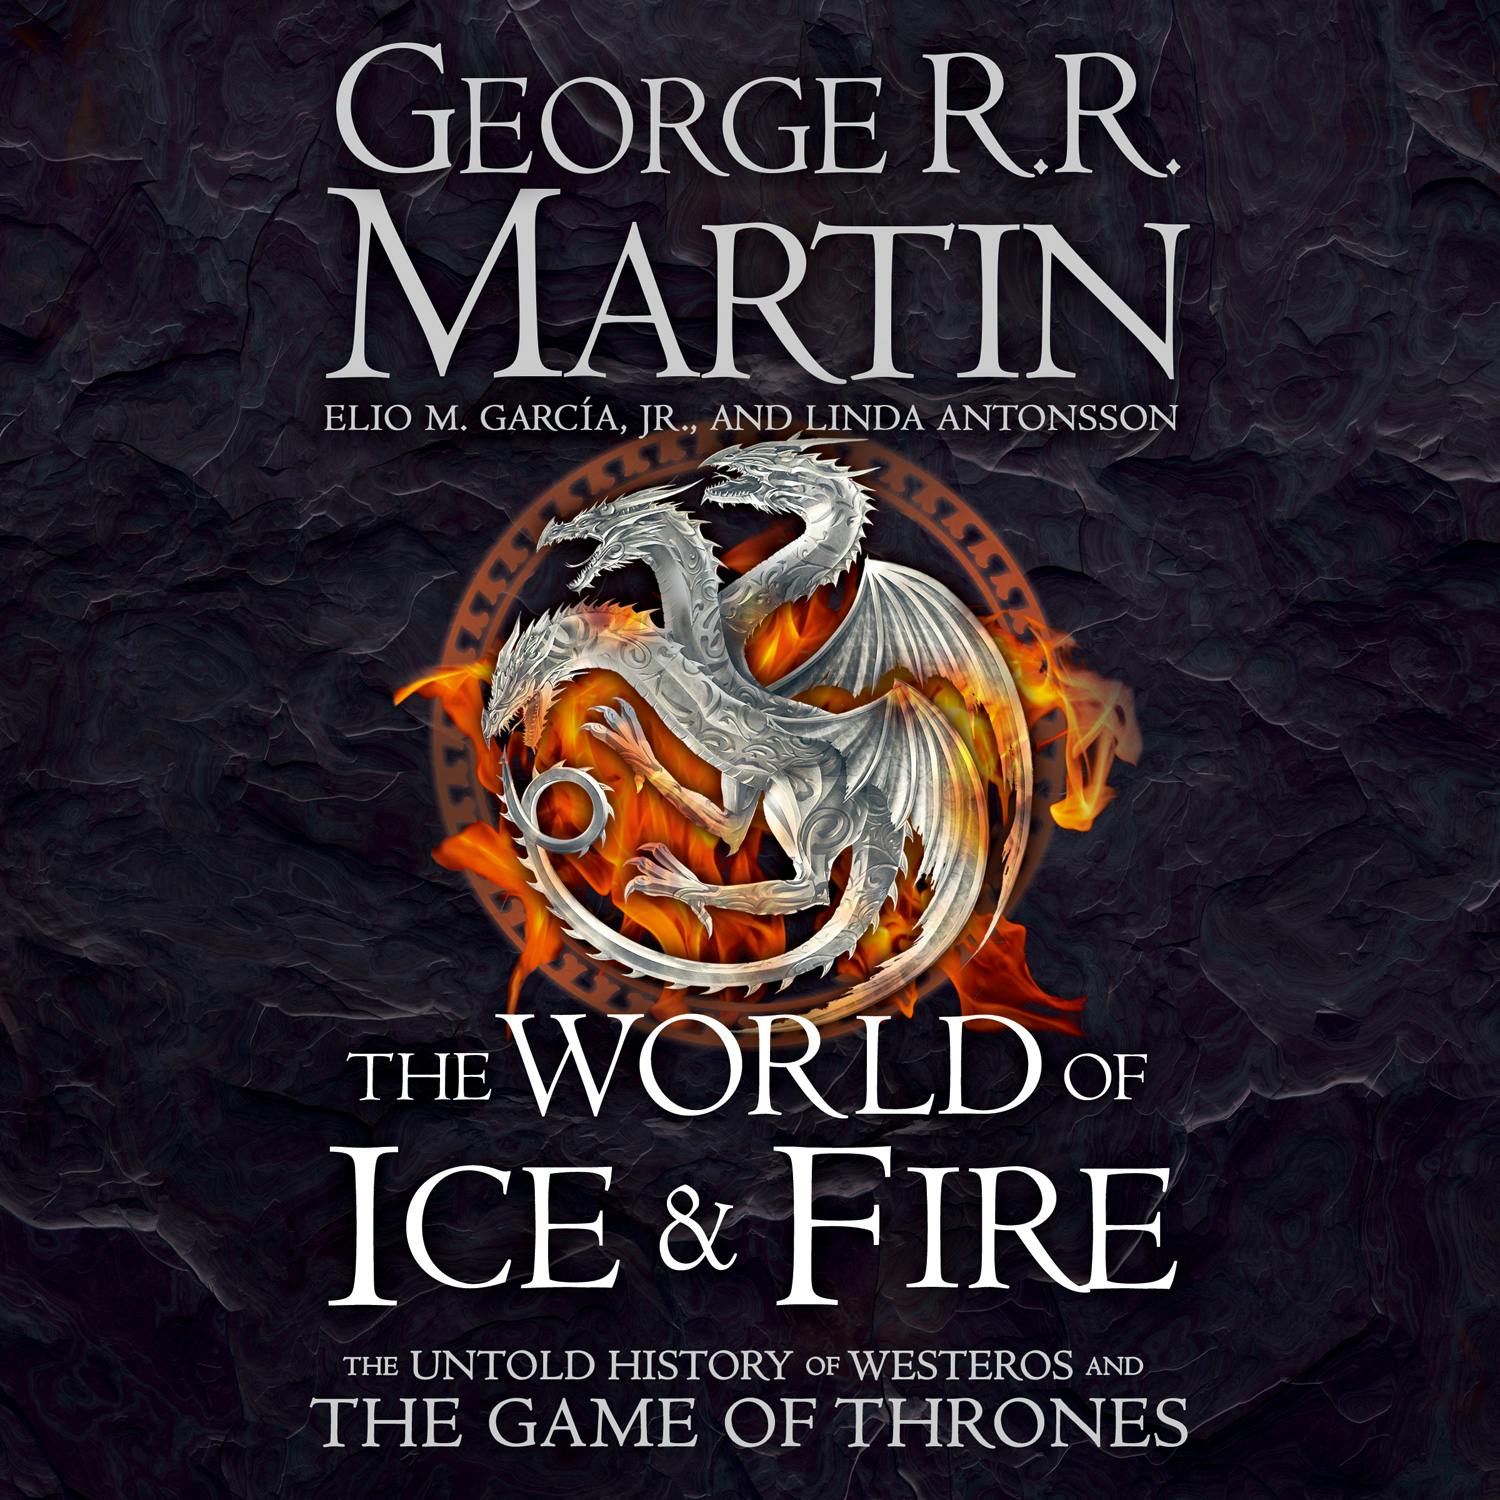 The World of Ice and Fire: The Untold History of Westeros and the Game of Thrones - Elio M. Garcia Jr., Linda Antonsson, George R.R. Martin